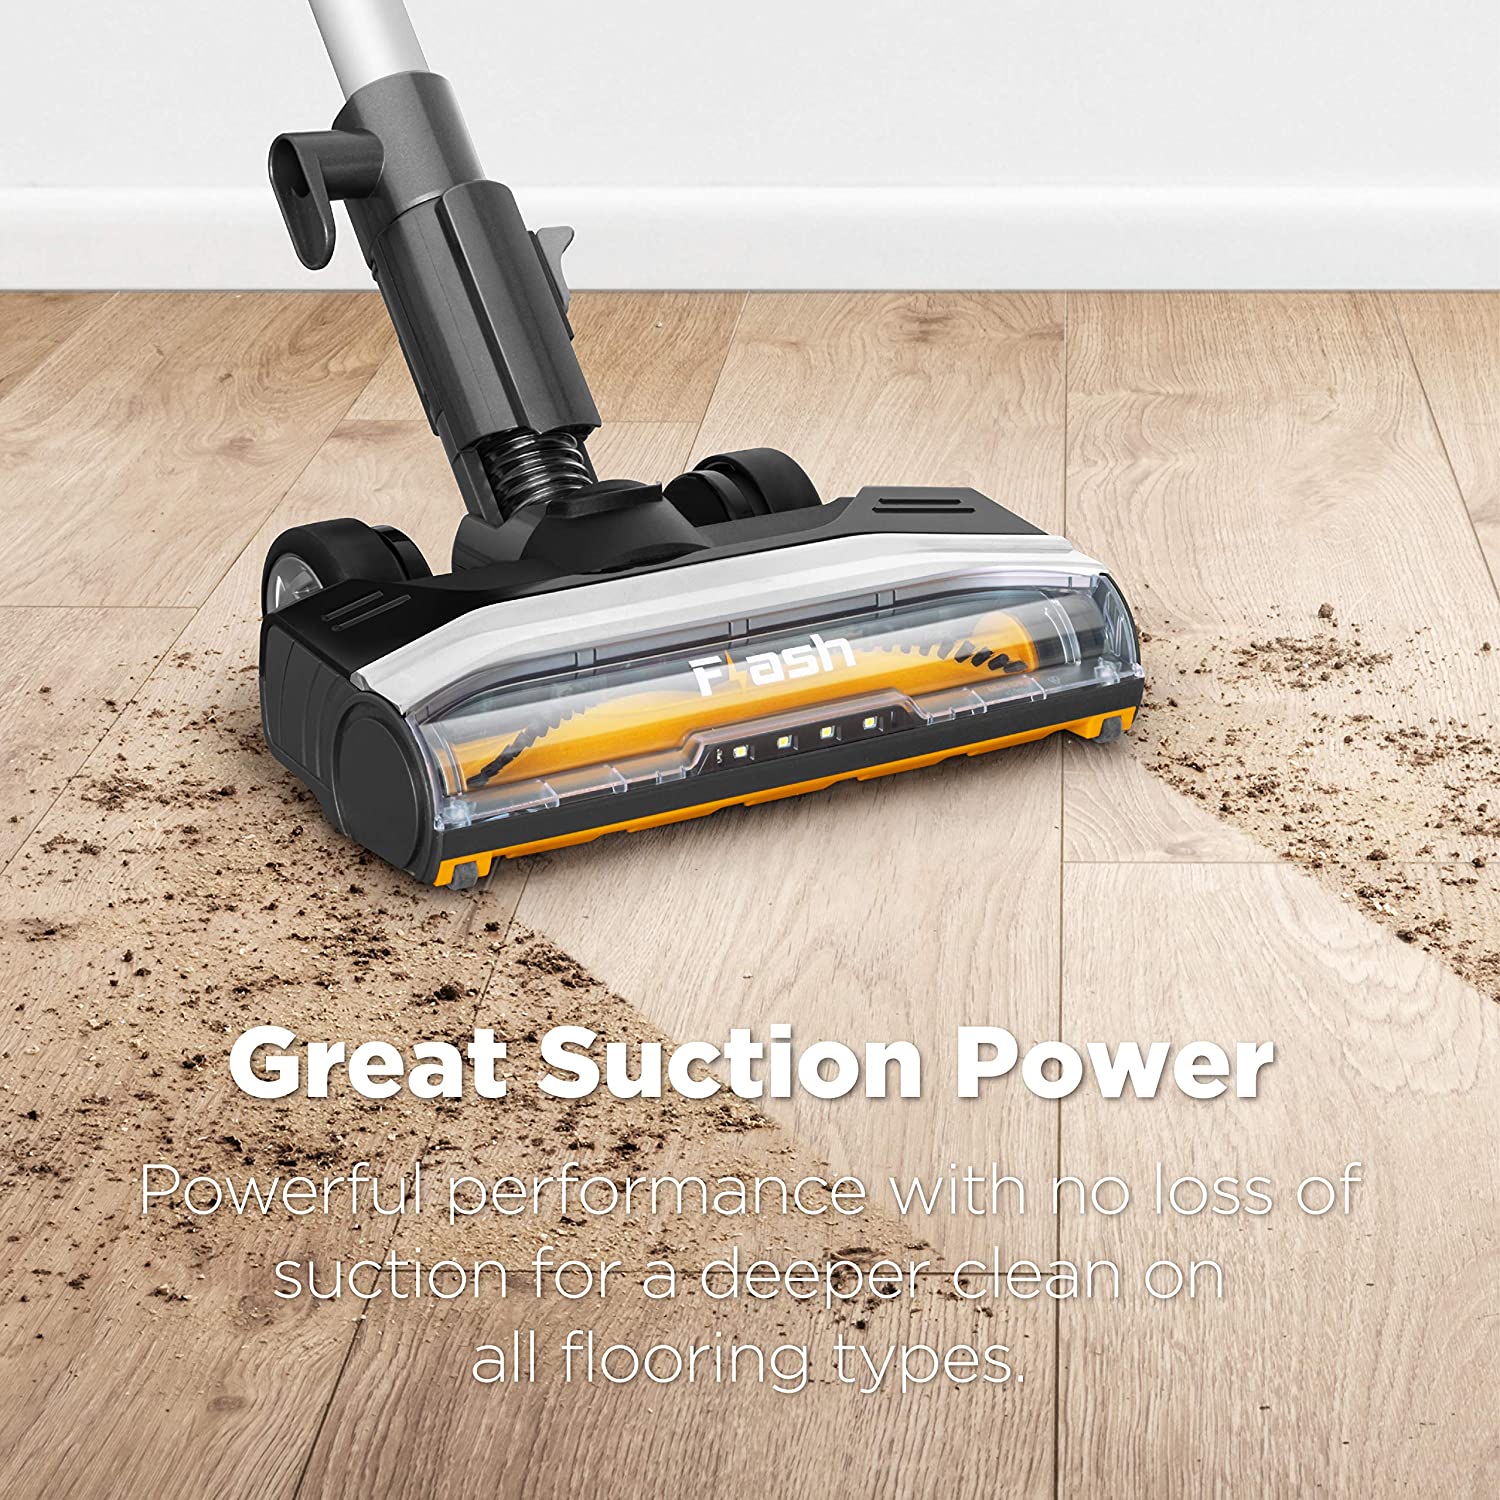 11 Best Vacuums For Laminate Floors, Best Small Vacuum For Laminate Floors